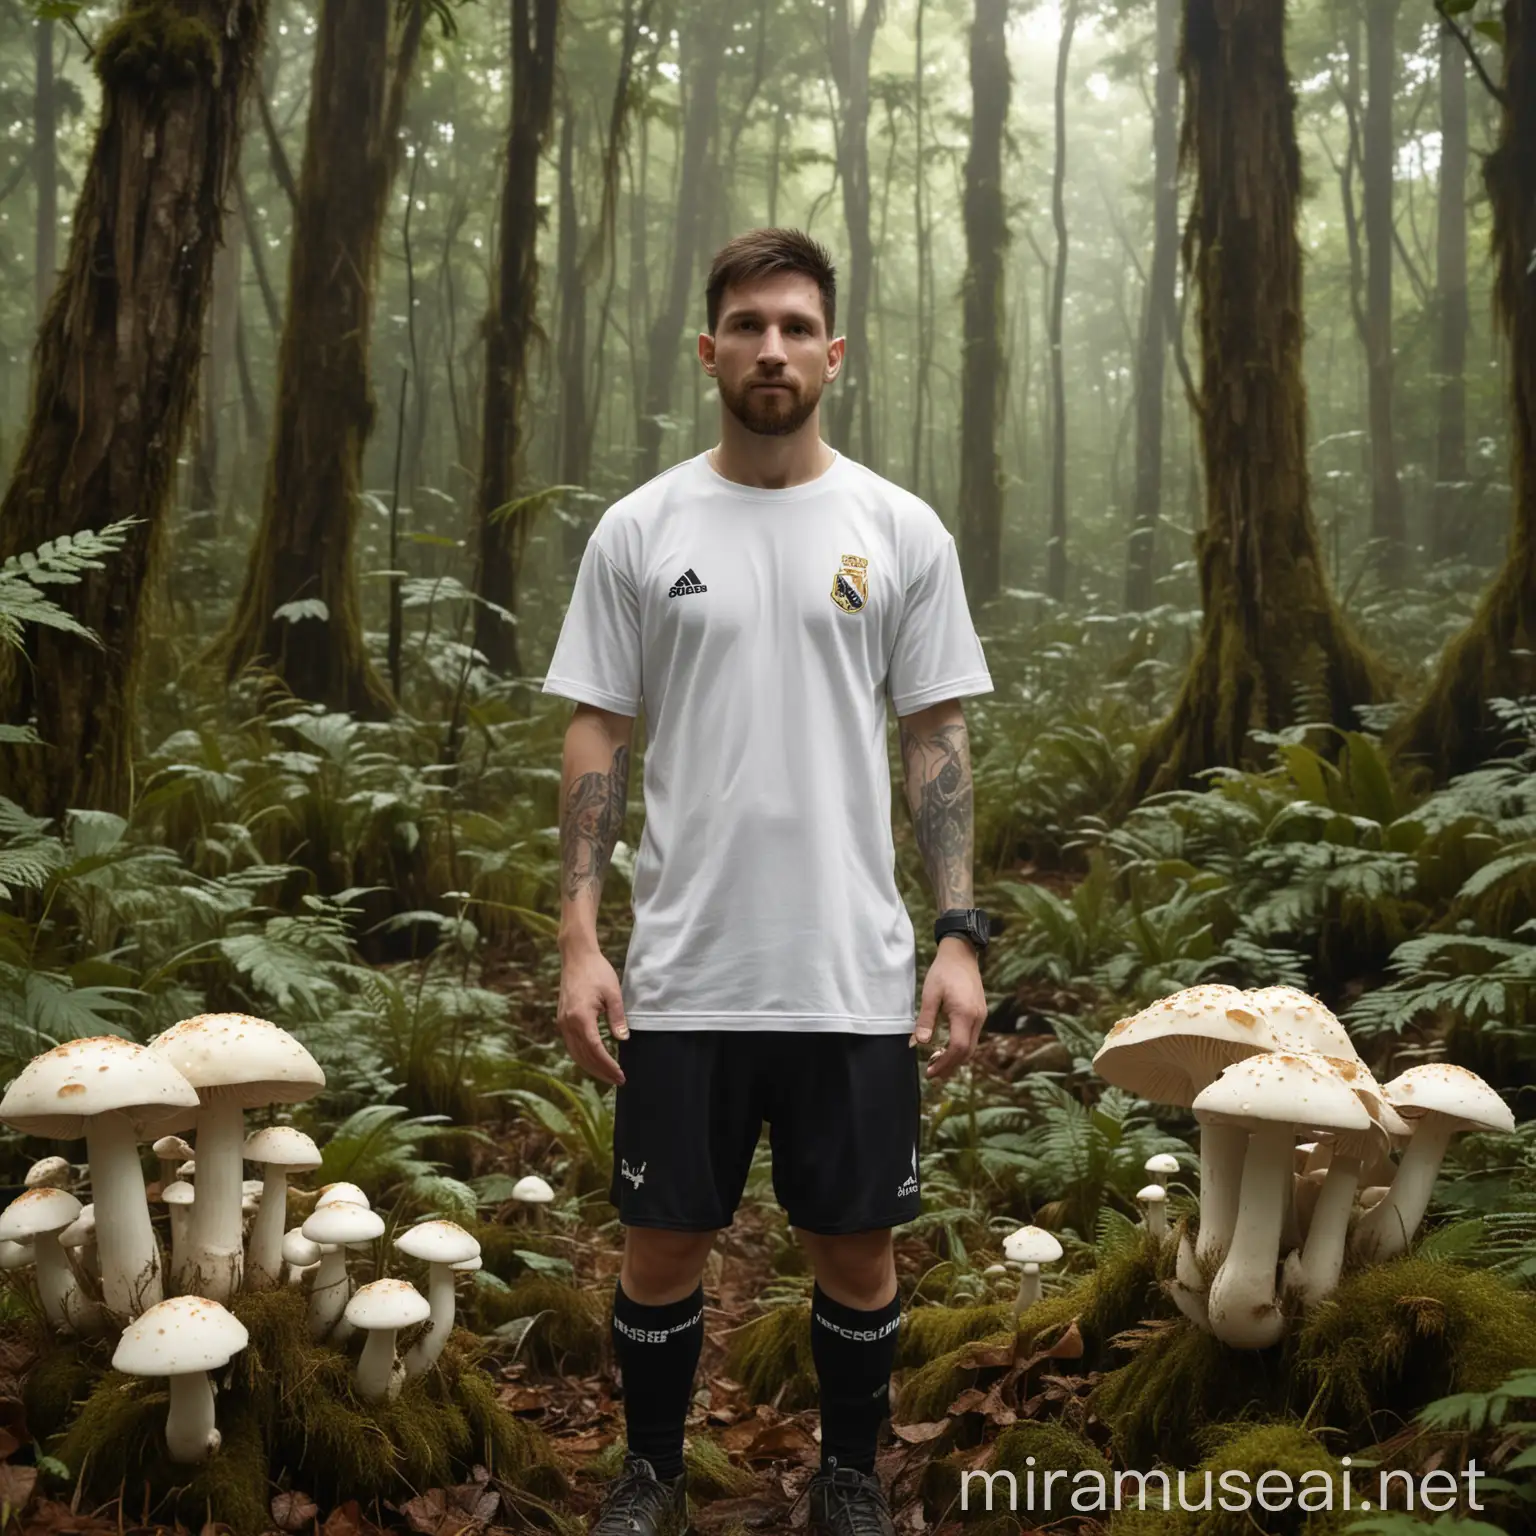 Mushrooms Agaricales all white with scales colour cream in a depp rainforest. ultra hd.  Add a real Messi in the back, With the Argentina football t-shirt and a mate in their hand.